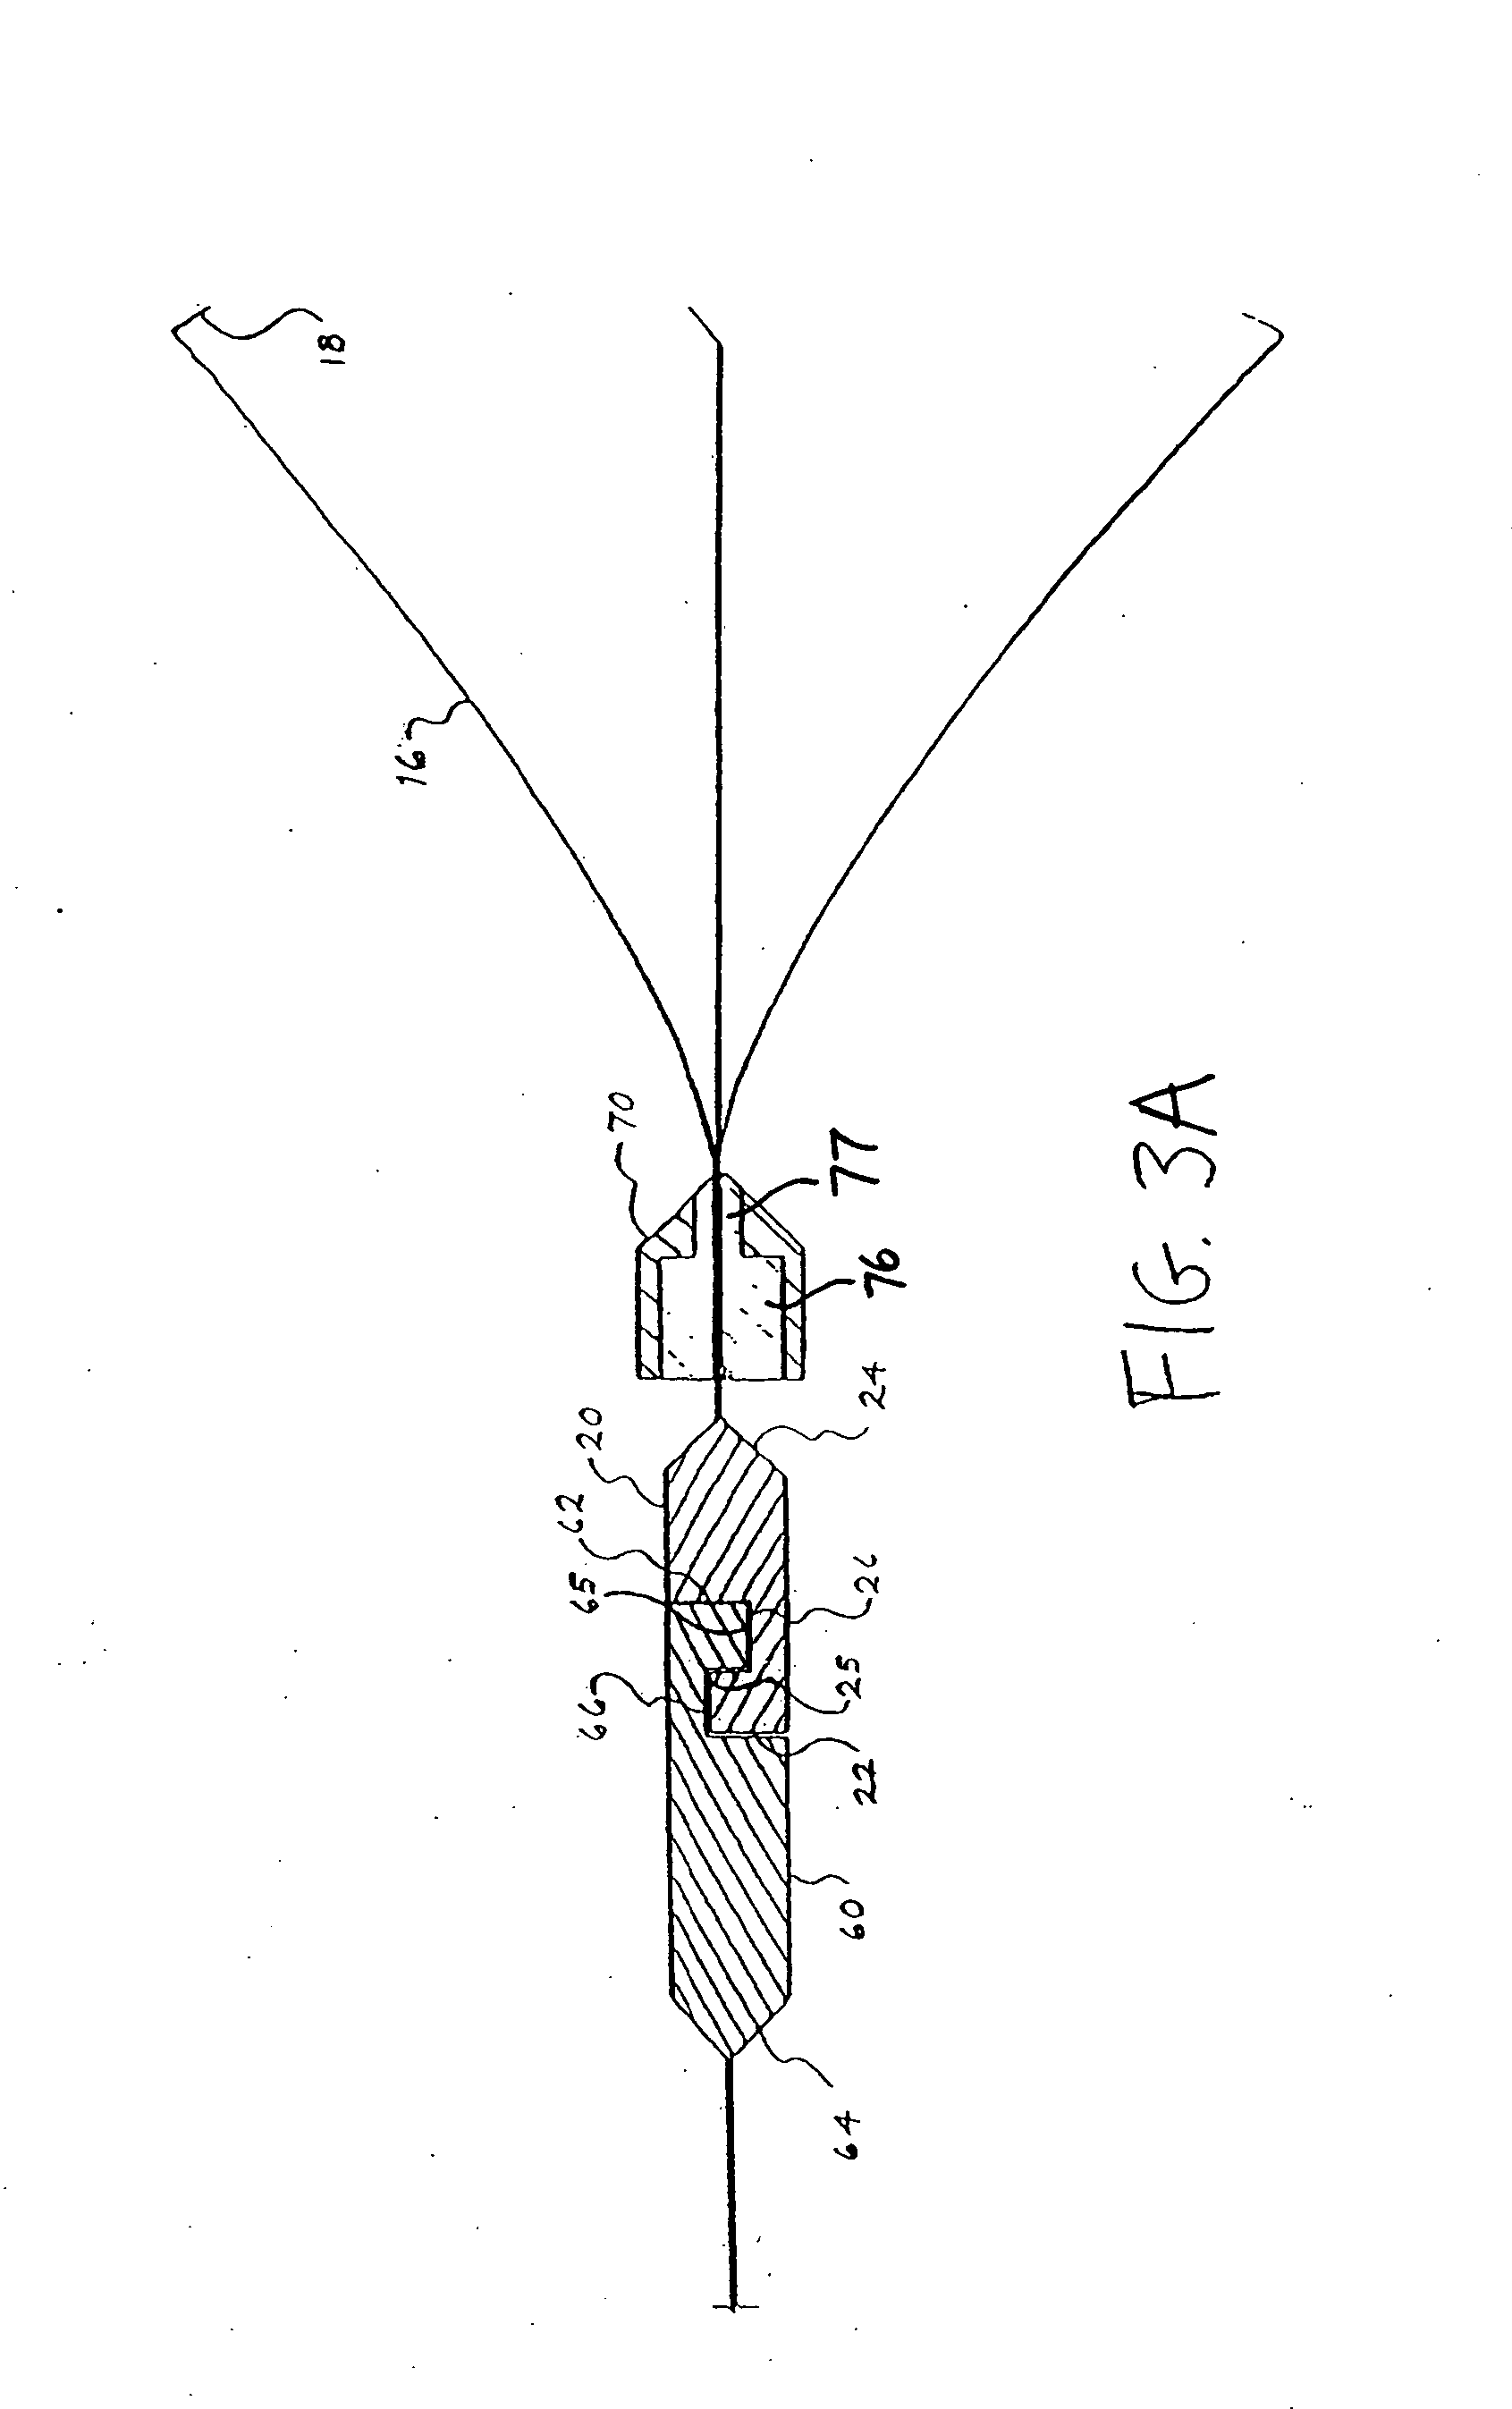 Release mechanisms for a clip device